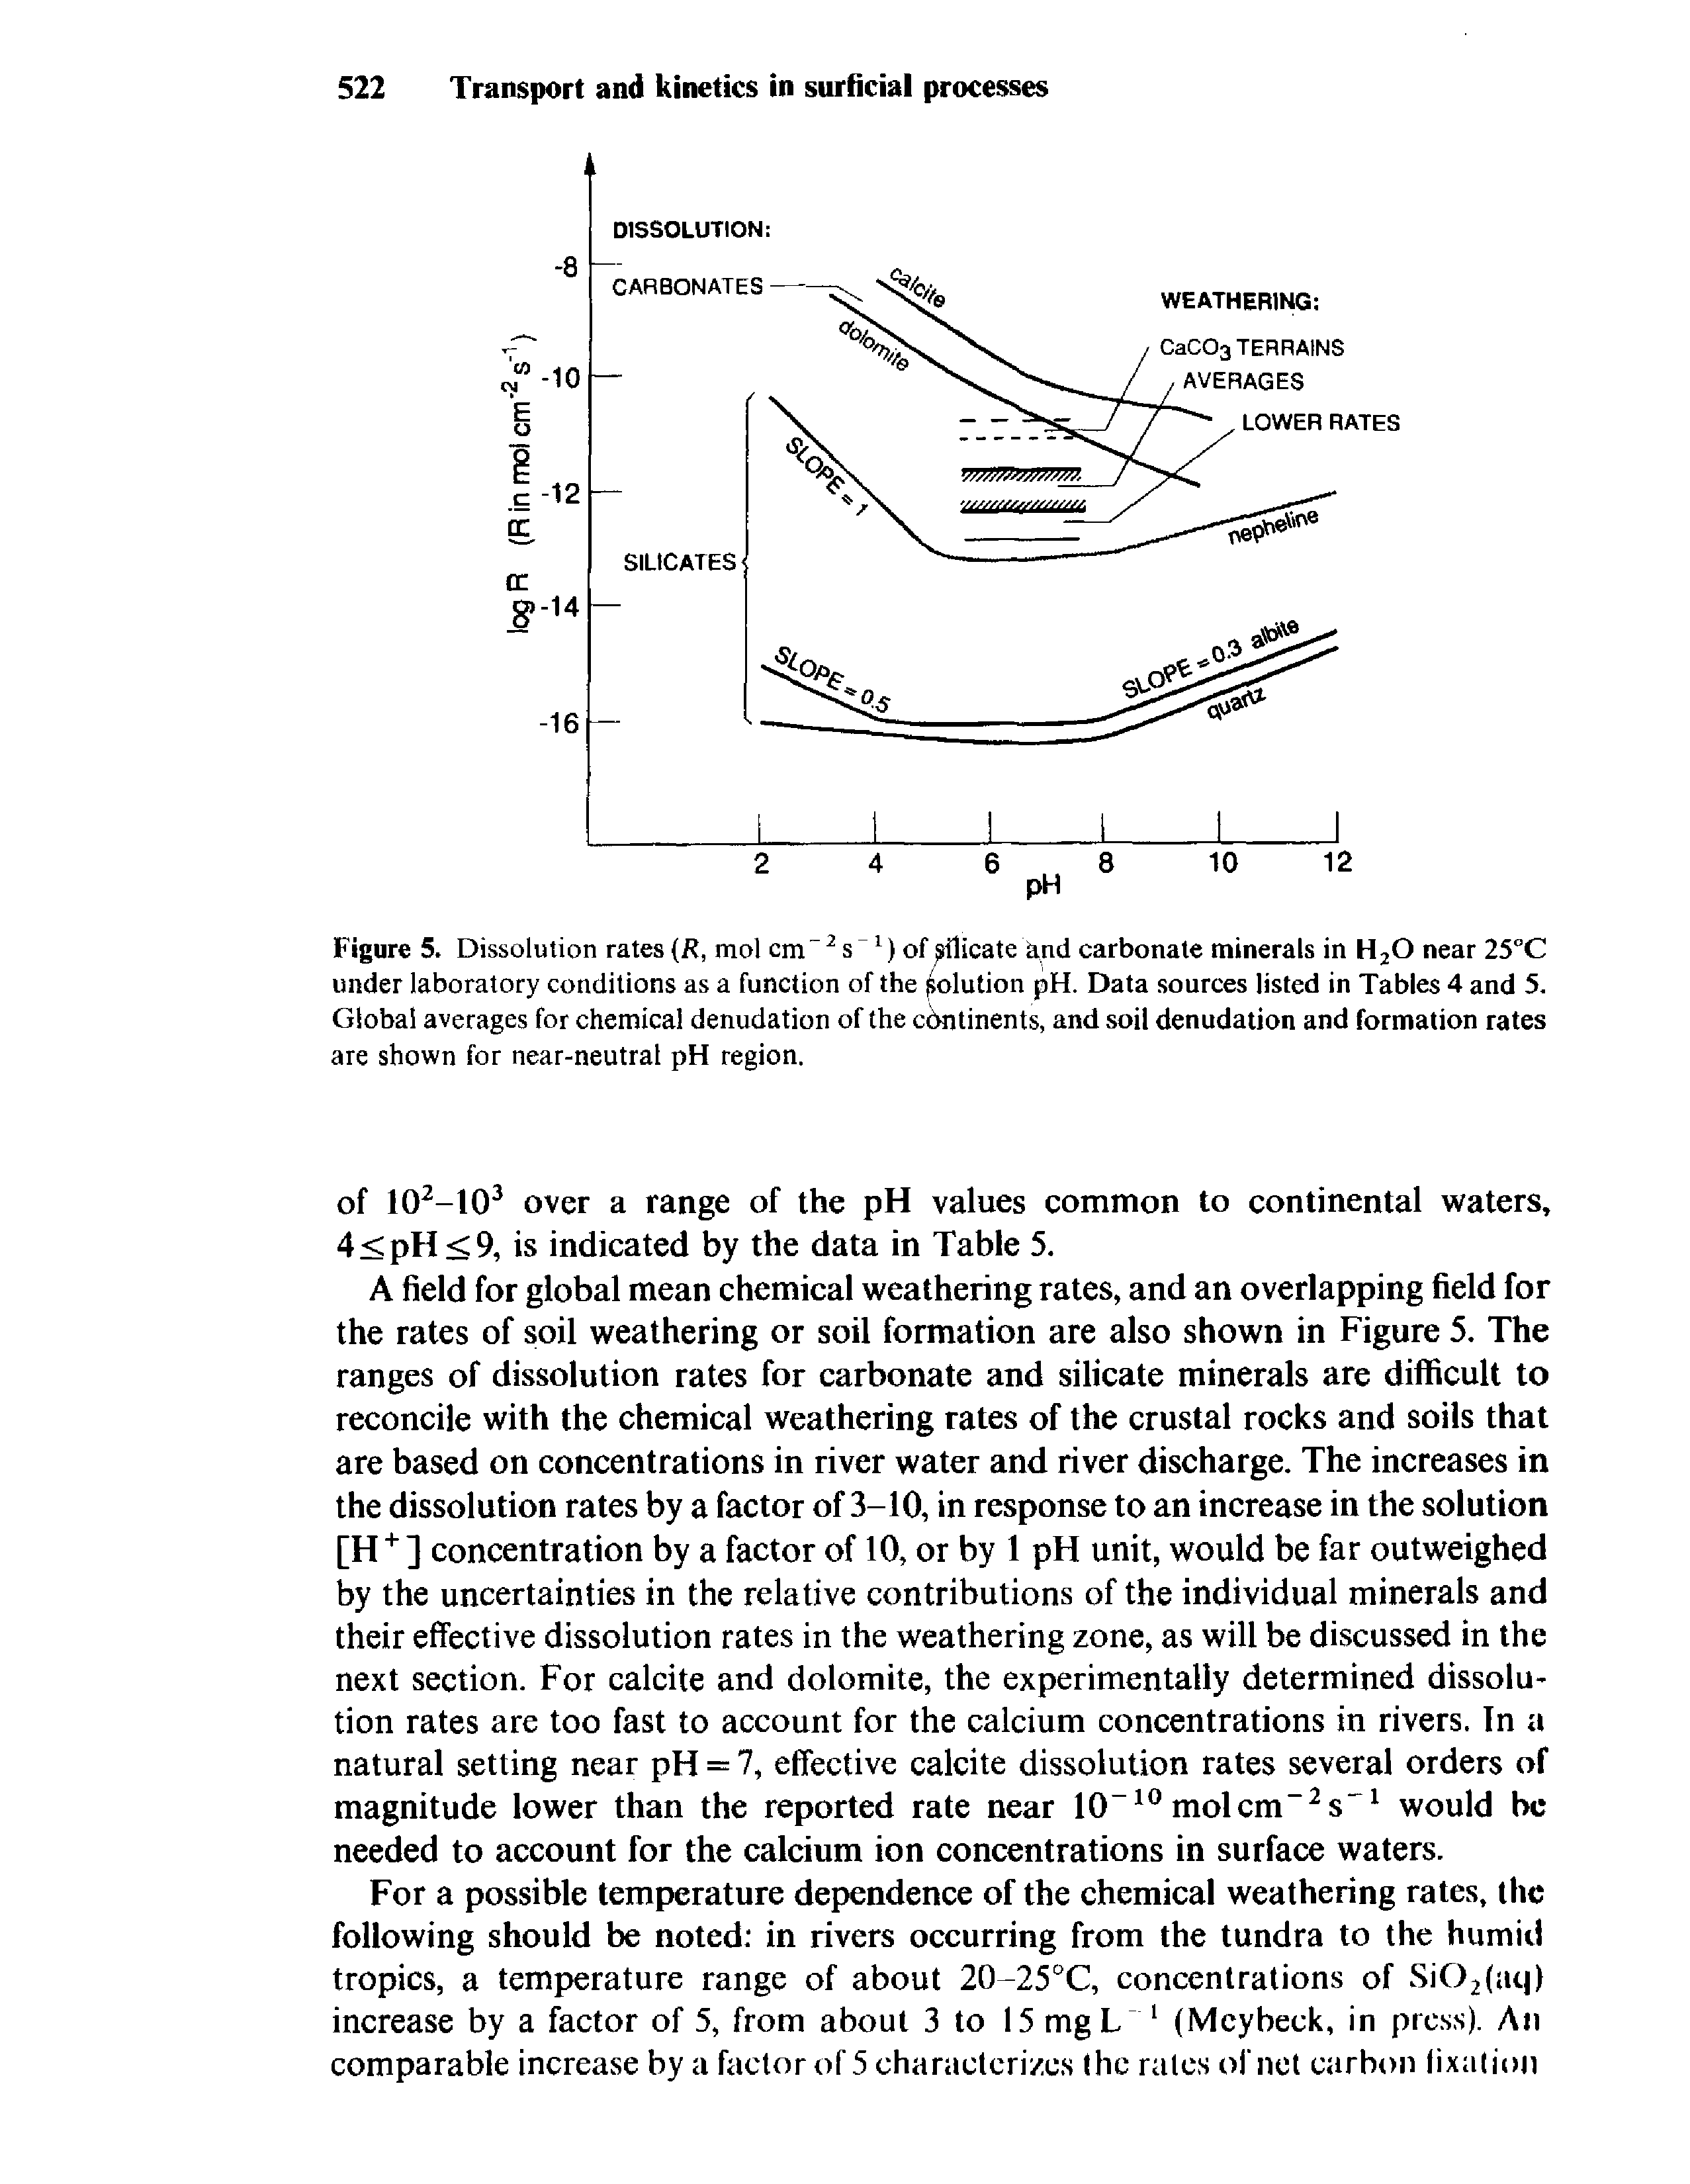 Figure 5. Dissolution rates (R, mol cm " 2 s 1) of plicate and carbonate minerals in H20 near 25°C under laboratory conditions as a function of the (solution pH. Data sources listed in Tables 4 and 5. Global averages for chemical denudation of the continents, and soil denudation and formation rates are shown for near-neutral pH region.